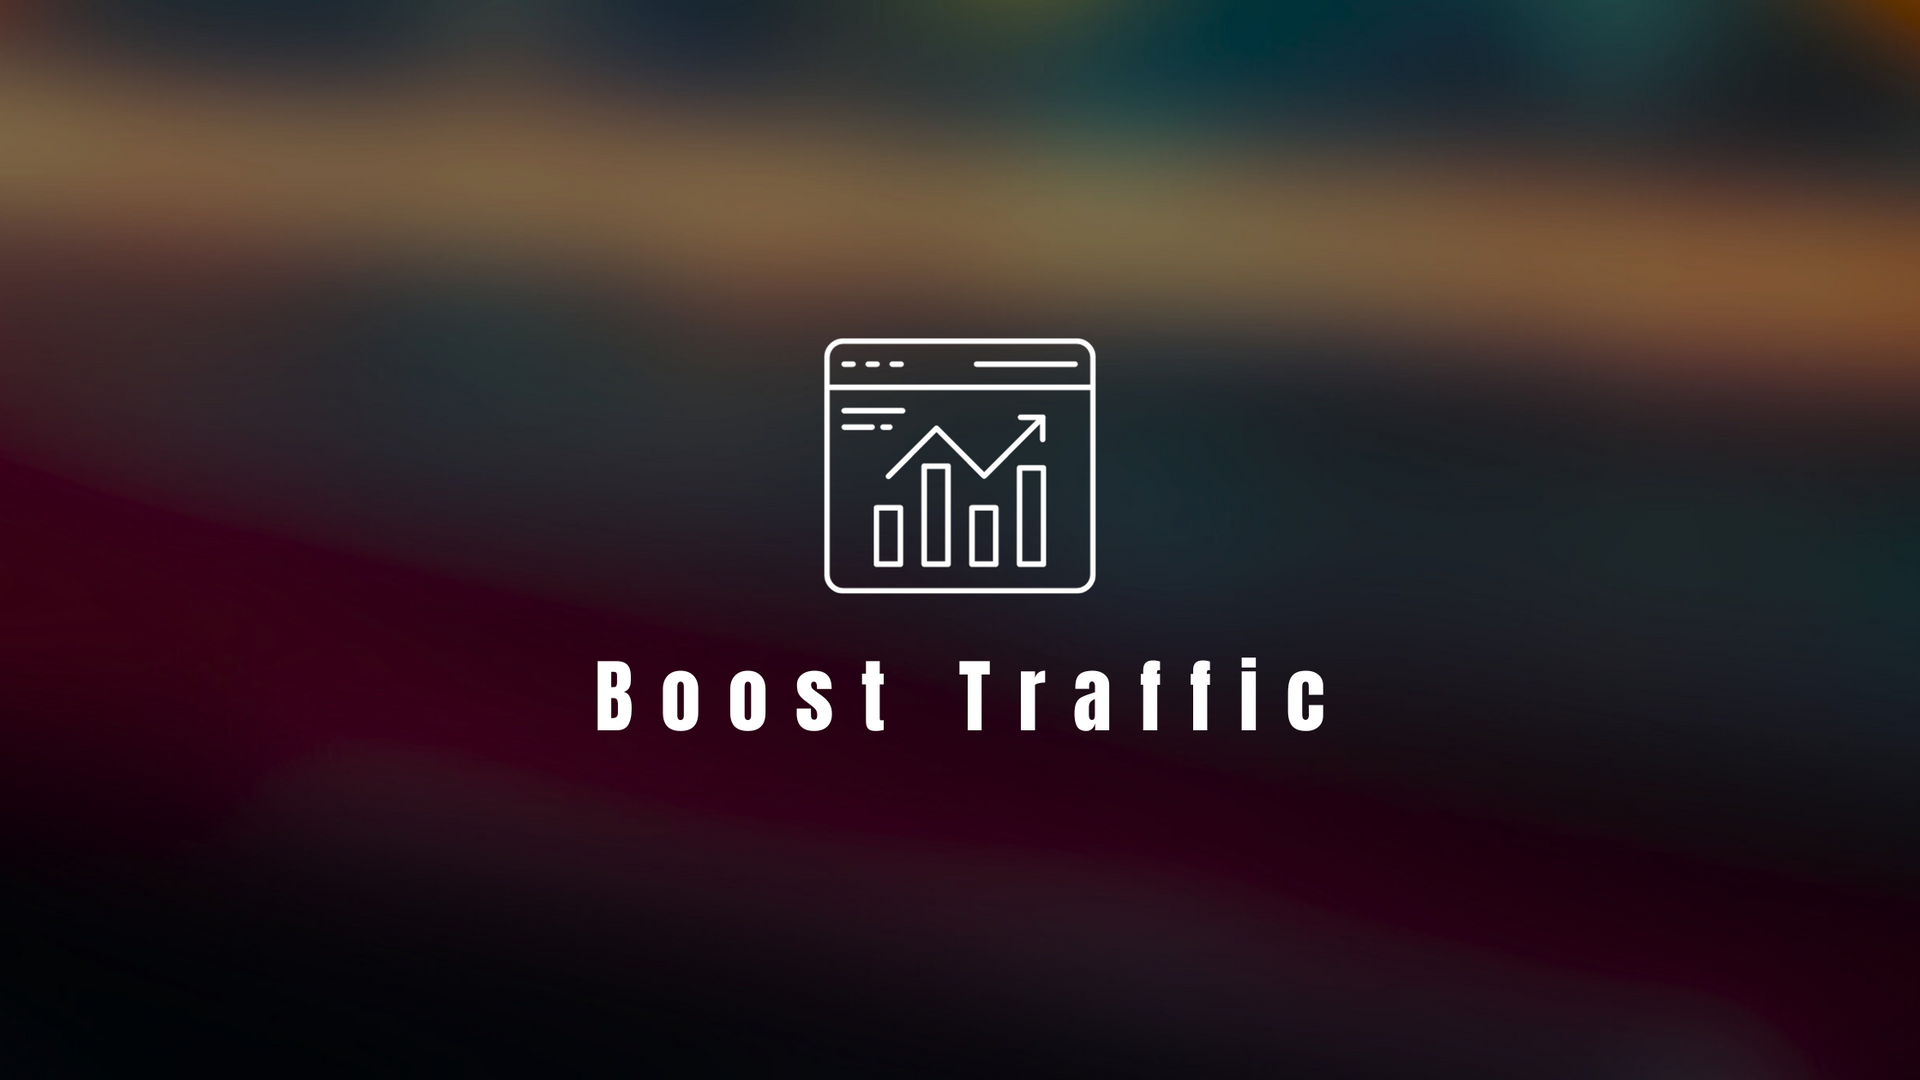 Step 3: Boost Traffic to Your Google My Business Listing